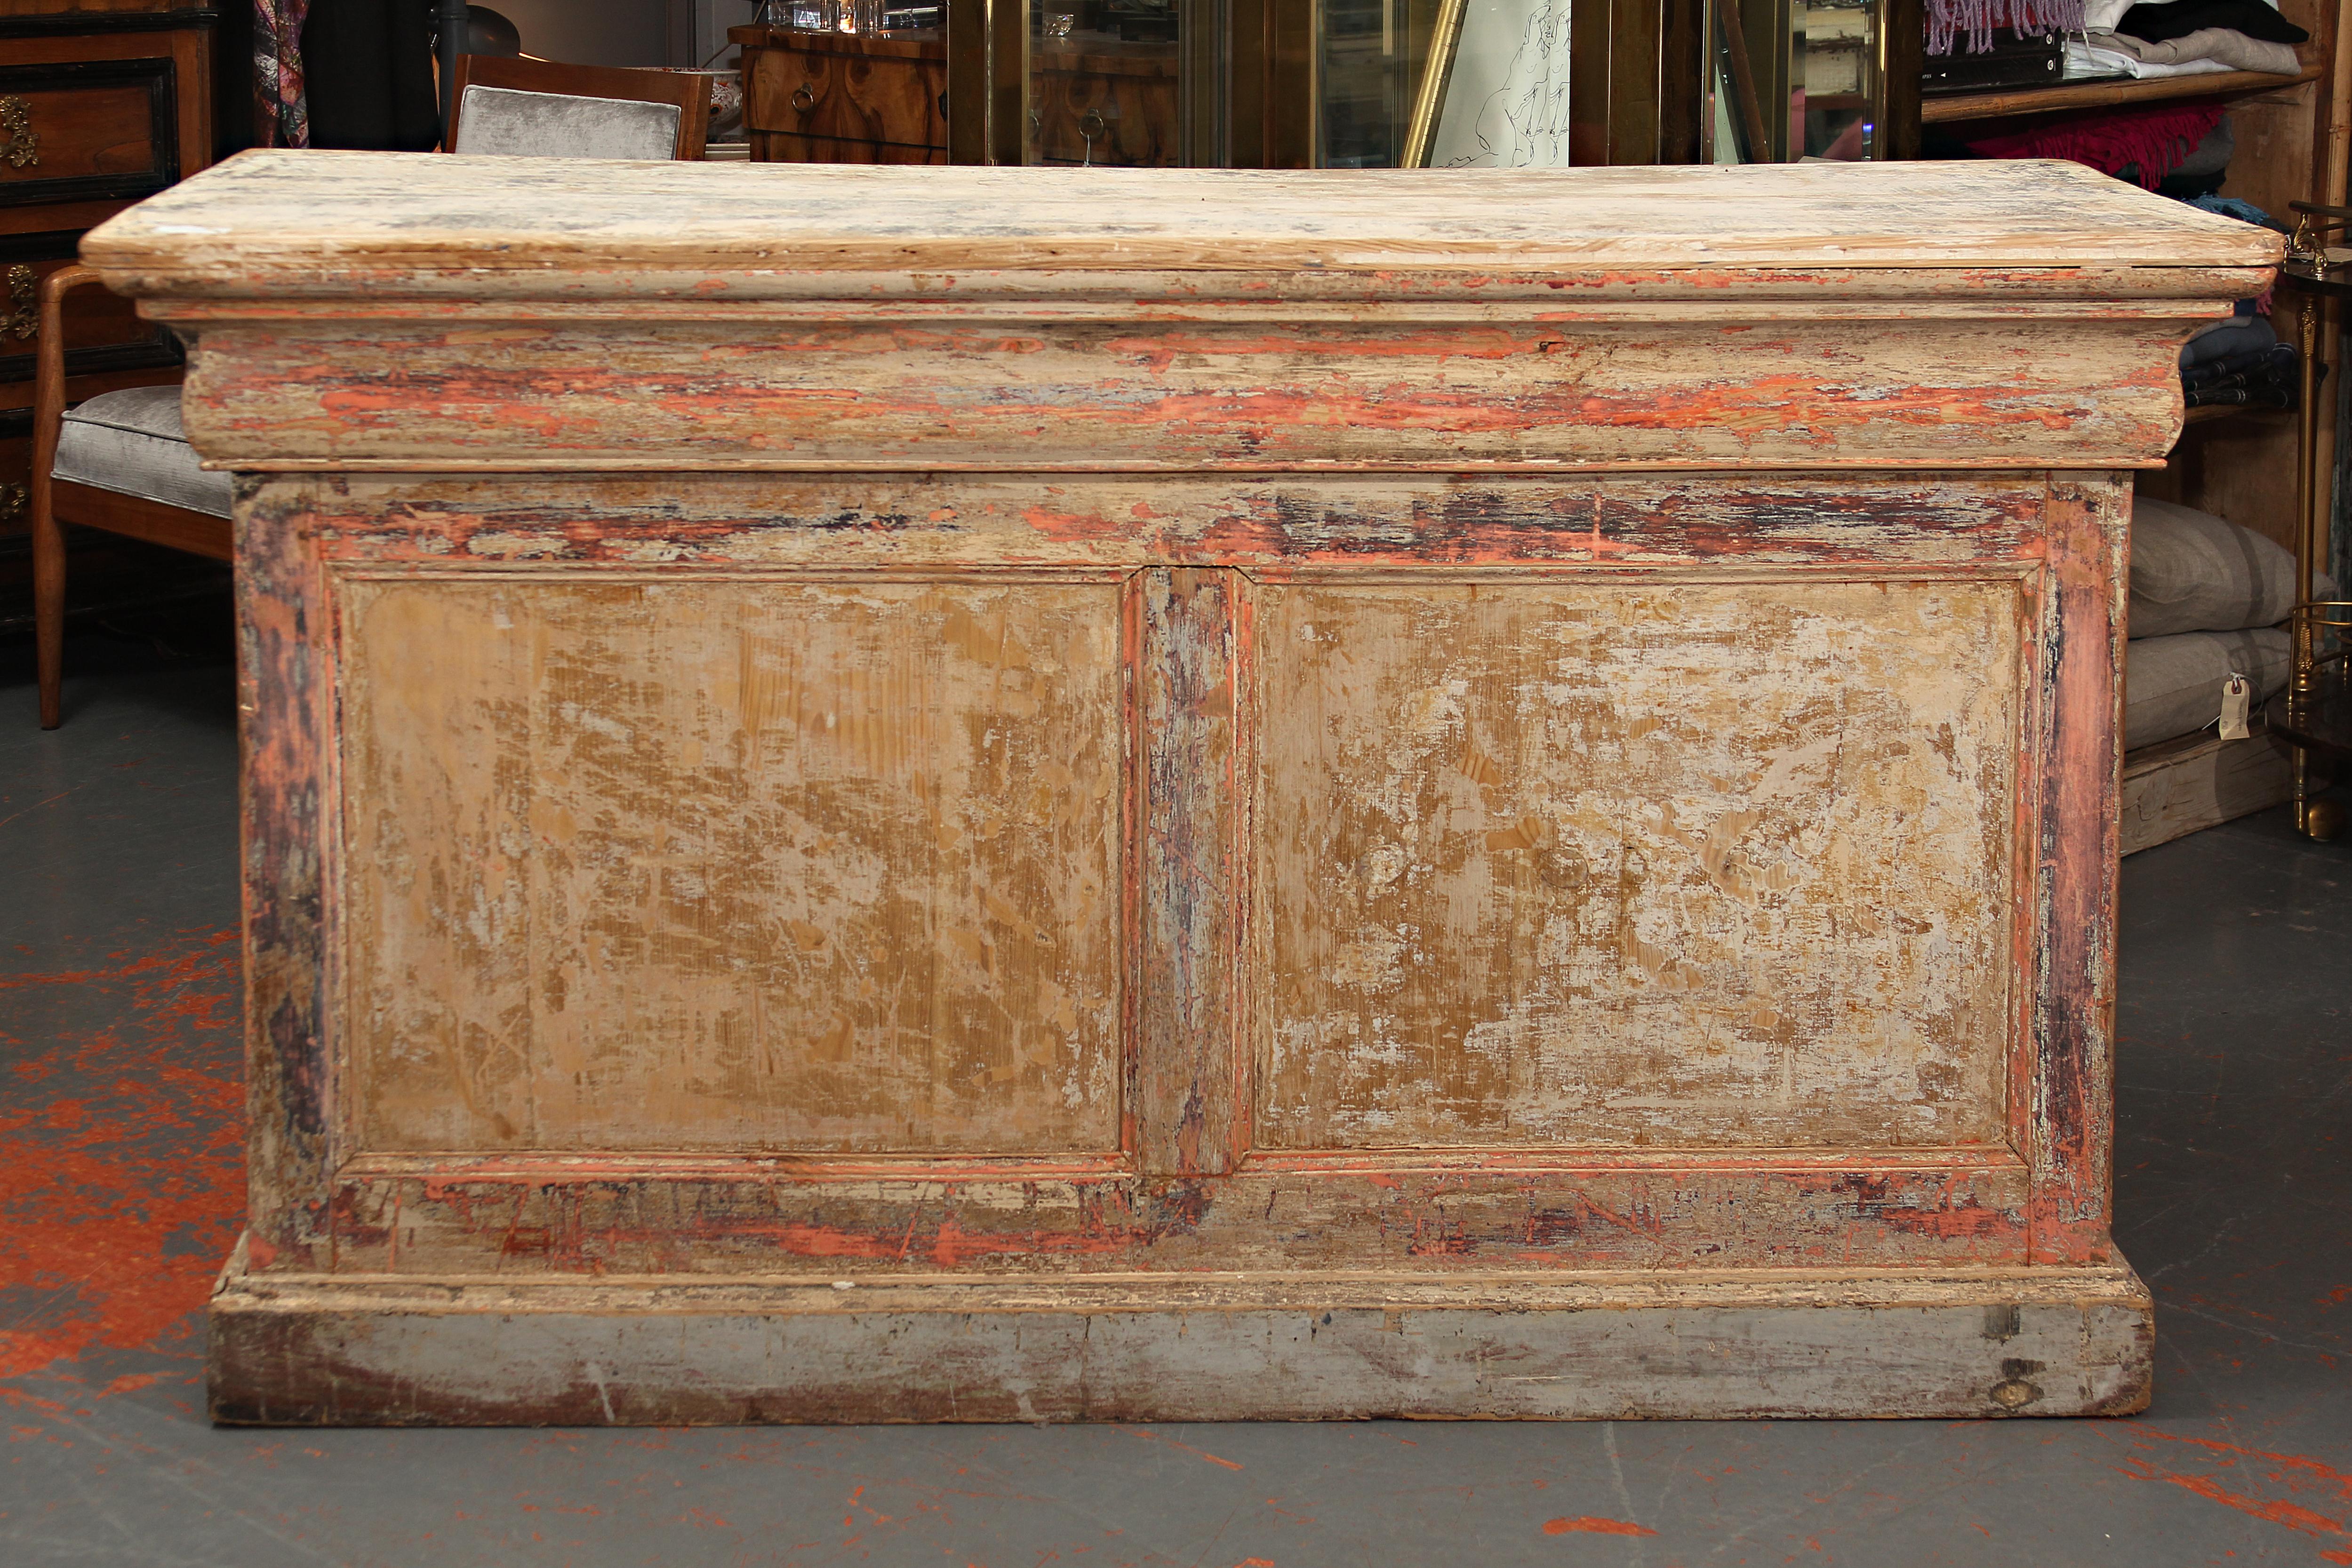 Very functional store counter from France. Layers of paint have been stripped away, many drawers. Would make a great kitchen island or console as well as a perfect check-out counter for a retail setting